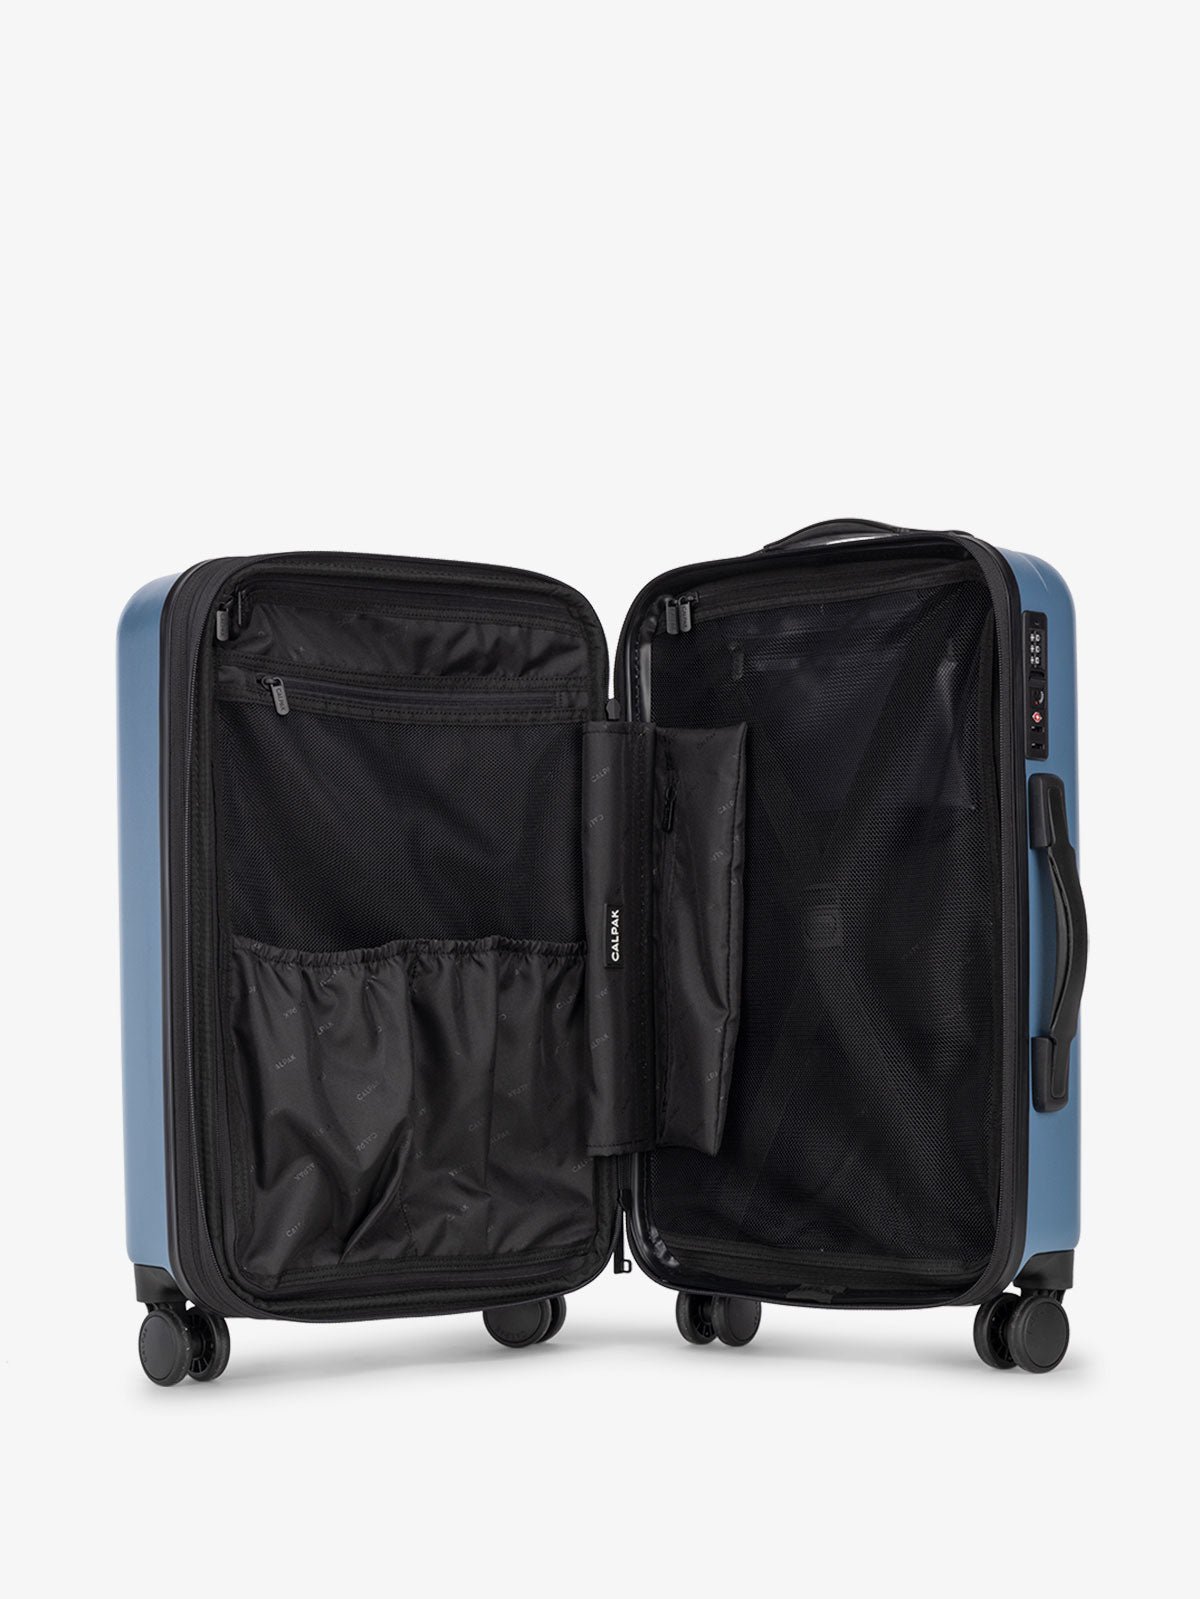 CALPAK Hard sided luggage bundle interior compartments and compression straps in blue